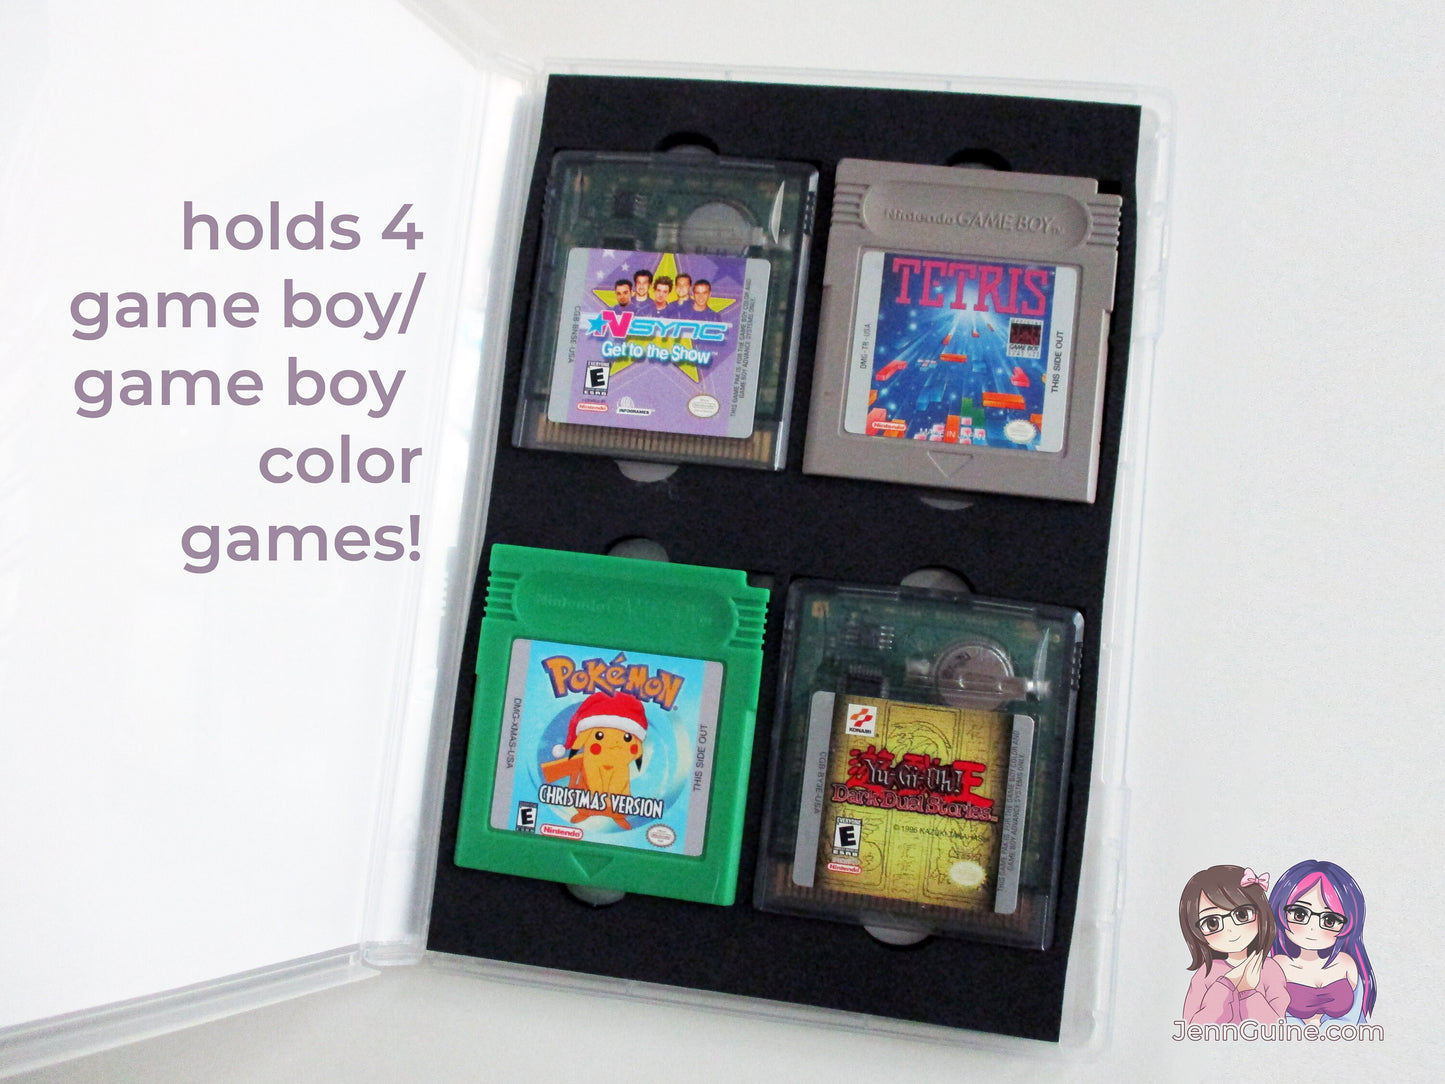 Gameboy/Color GBC Single-Sided DVD-Sized Cartridge Case Storage w/ Foam Insert - Can Hold 4 Gameboy [Color] Games - Read Description Please